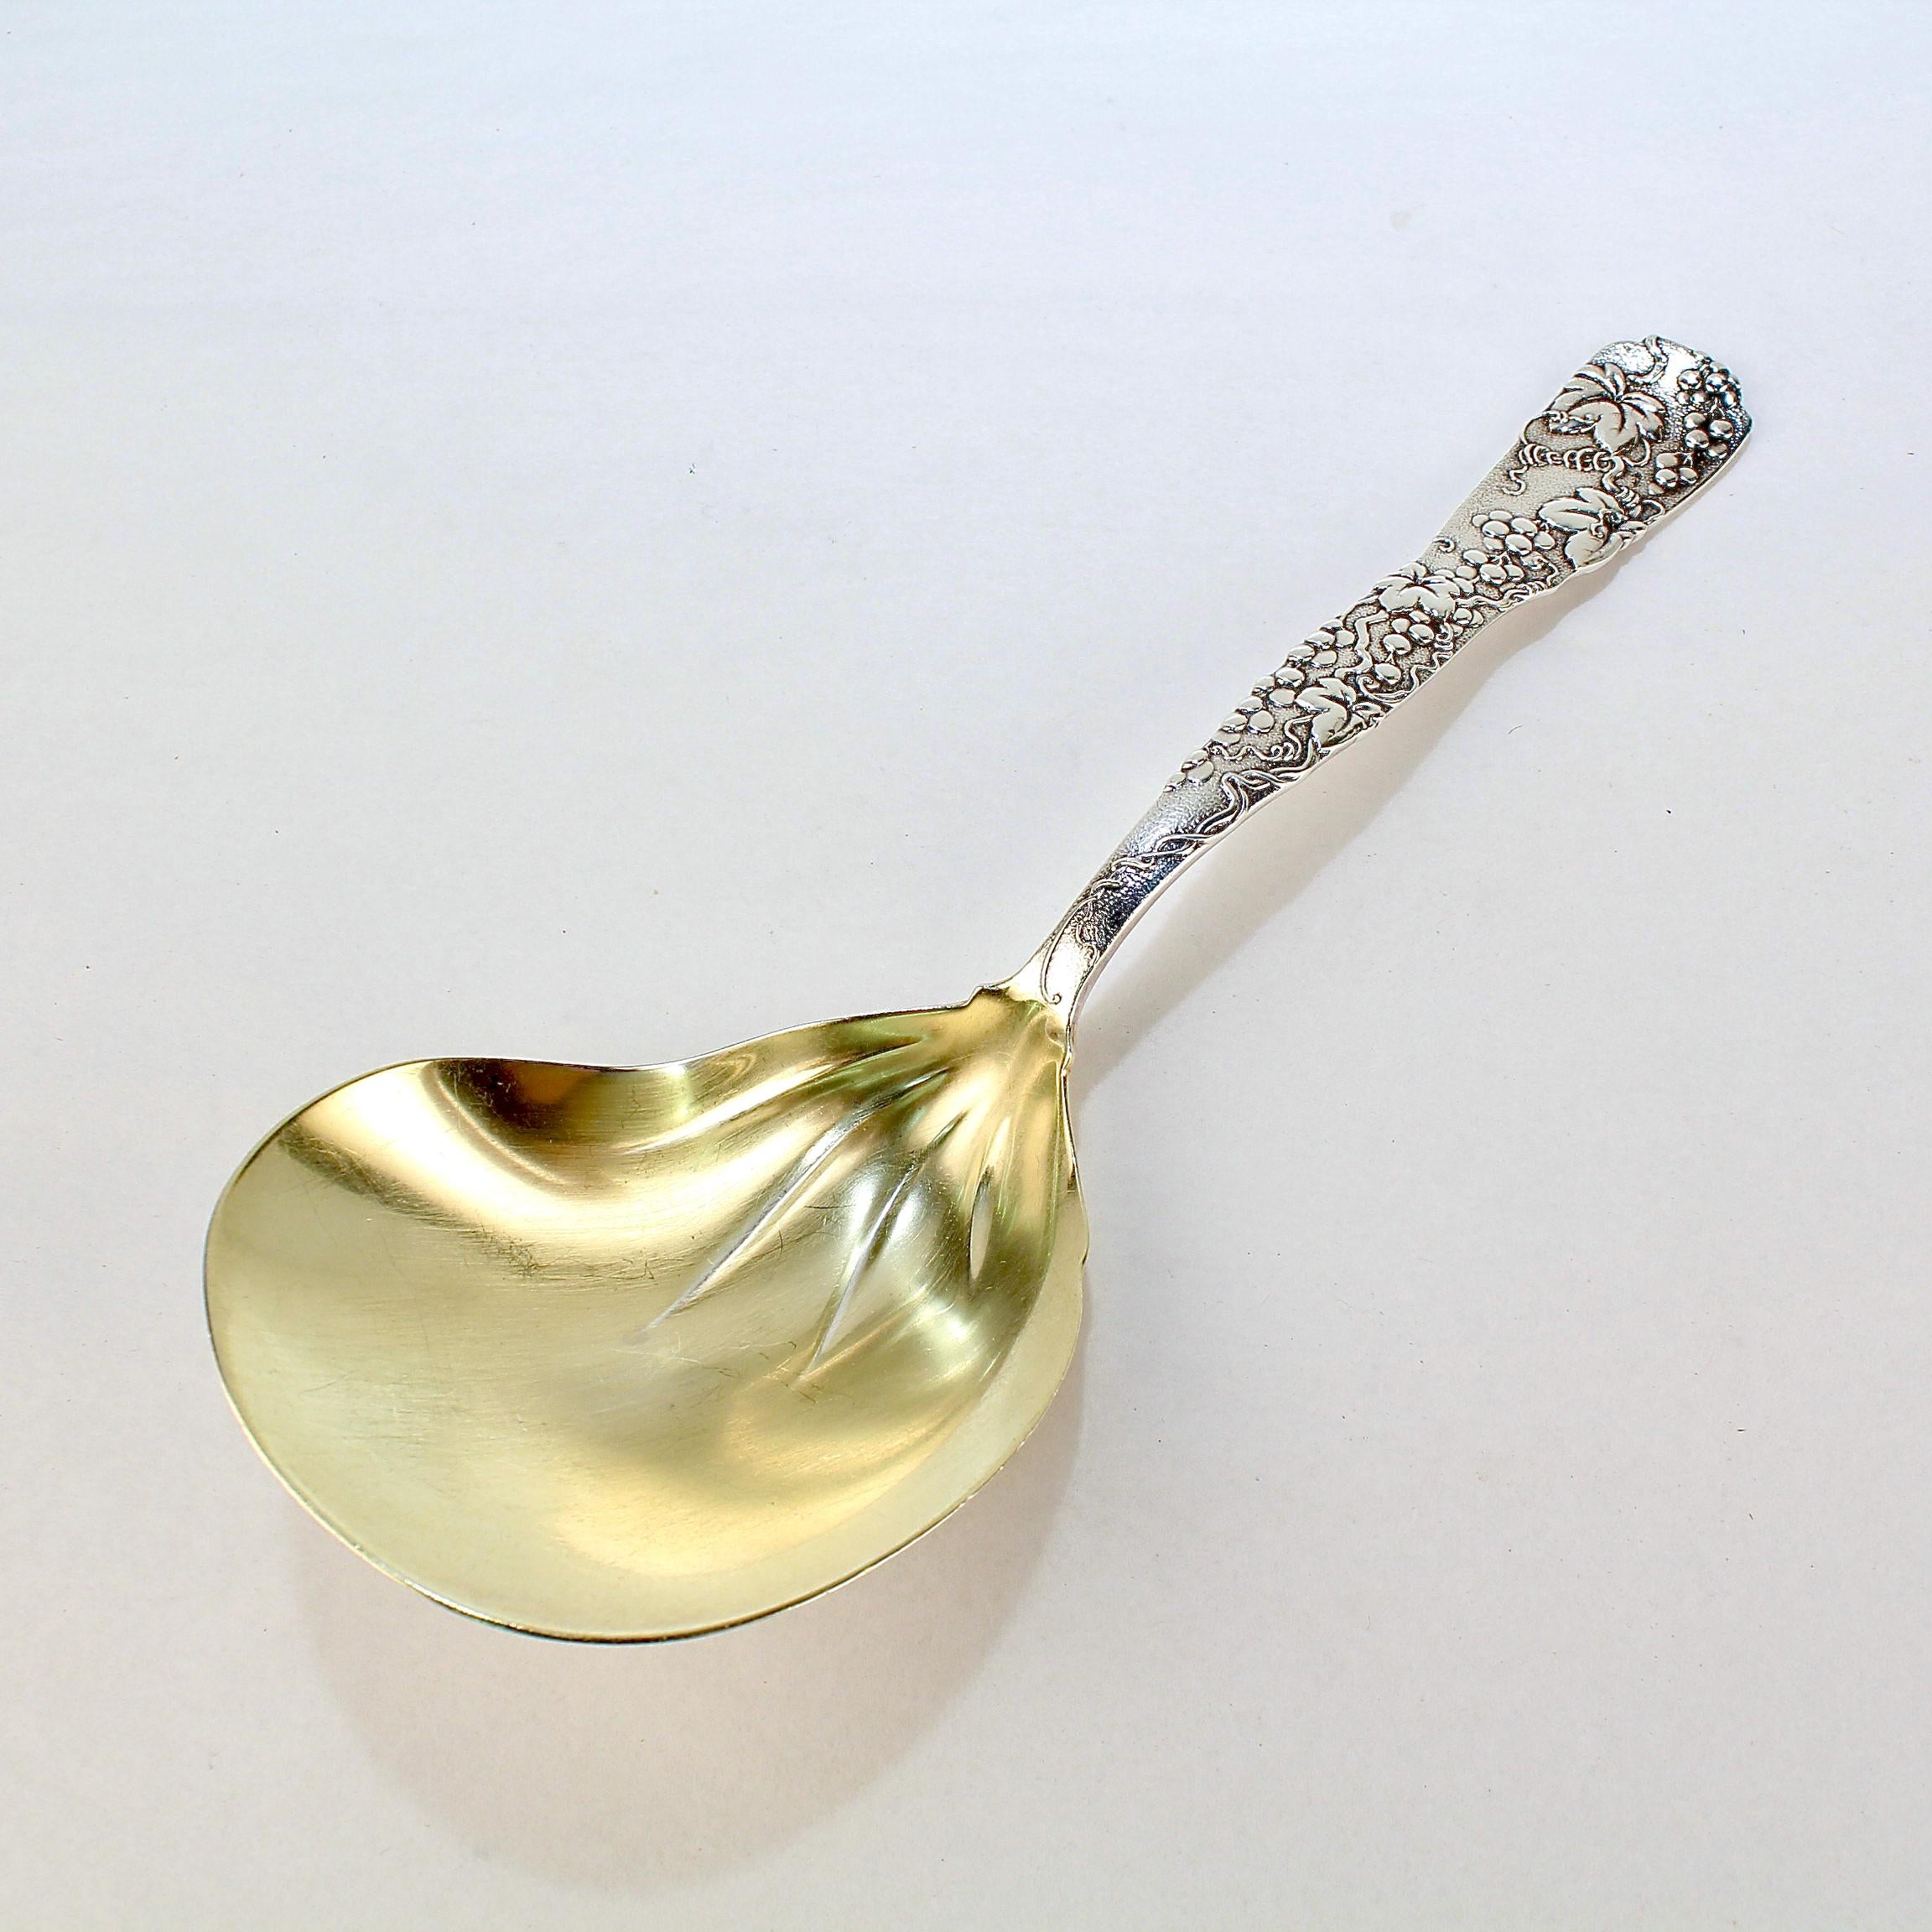 A very fine Tiffany & Co. sterling silver serving or berry spoon.

With a gold wash to the bowl.

In the 'Vine' pattern with a conch shell shaped bowl and an embossed grape vine decorating the length of the handle. 

Simply a great Tiffany serving